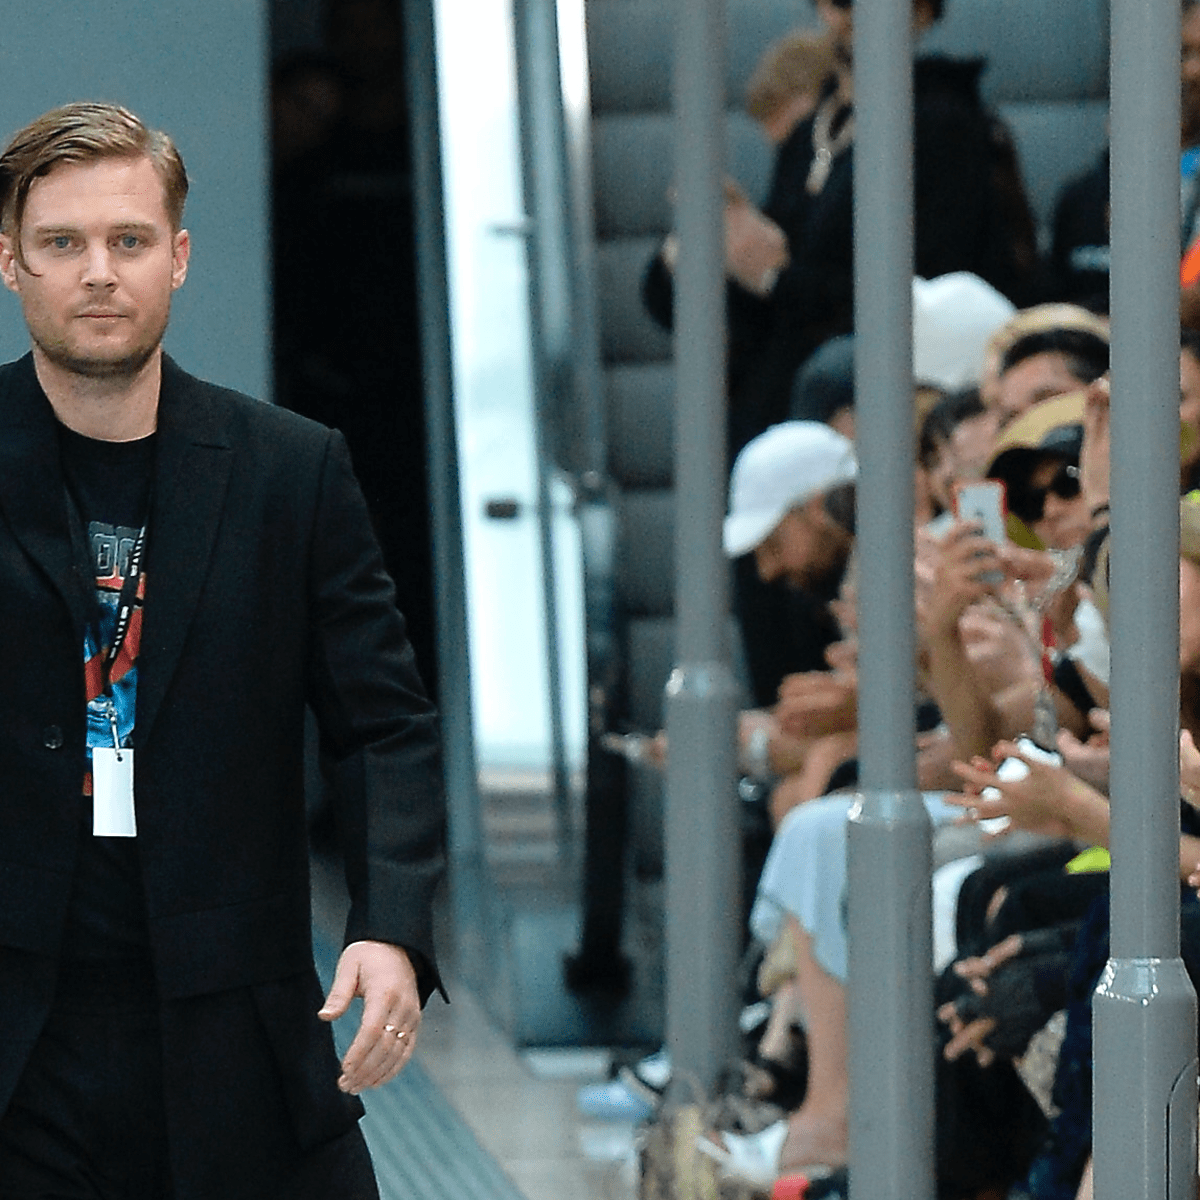 Matthew Williams of Alyx is Givenchy's New Creative Director - Fashionista